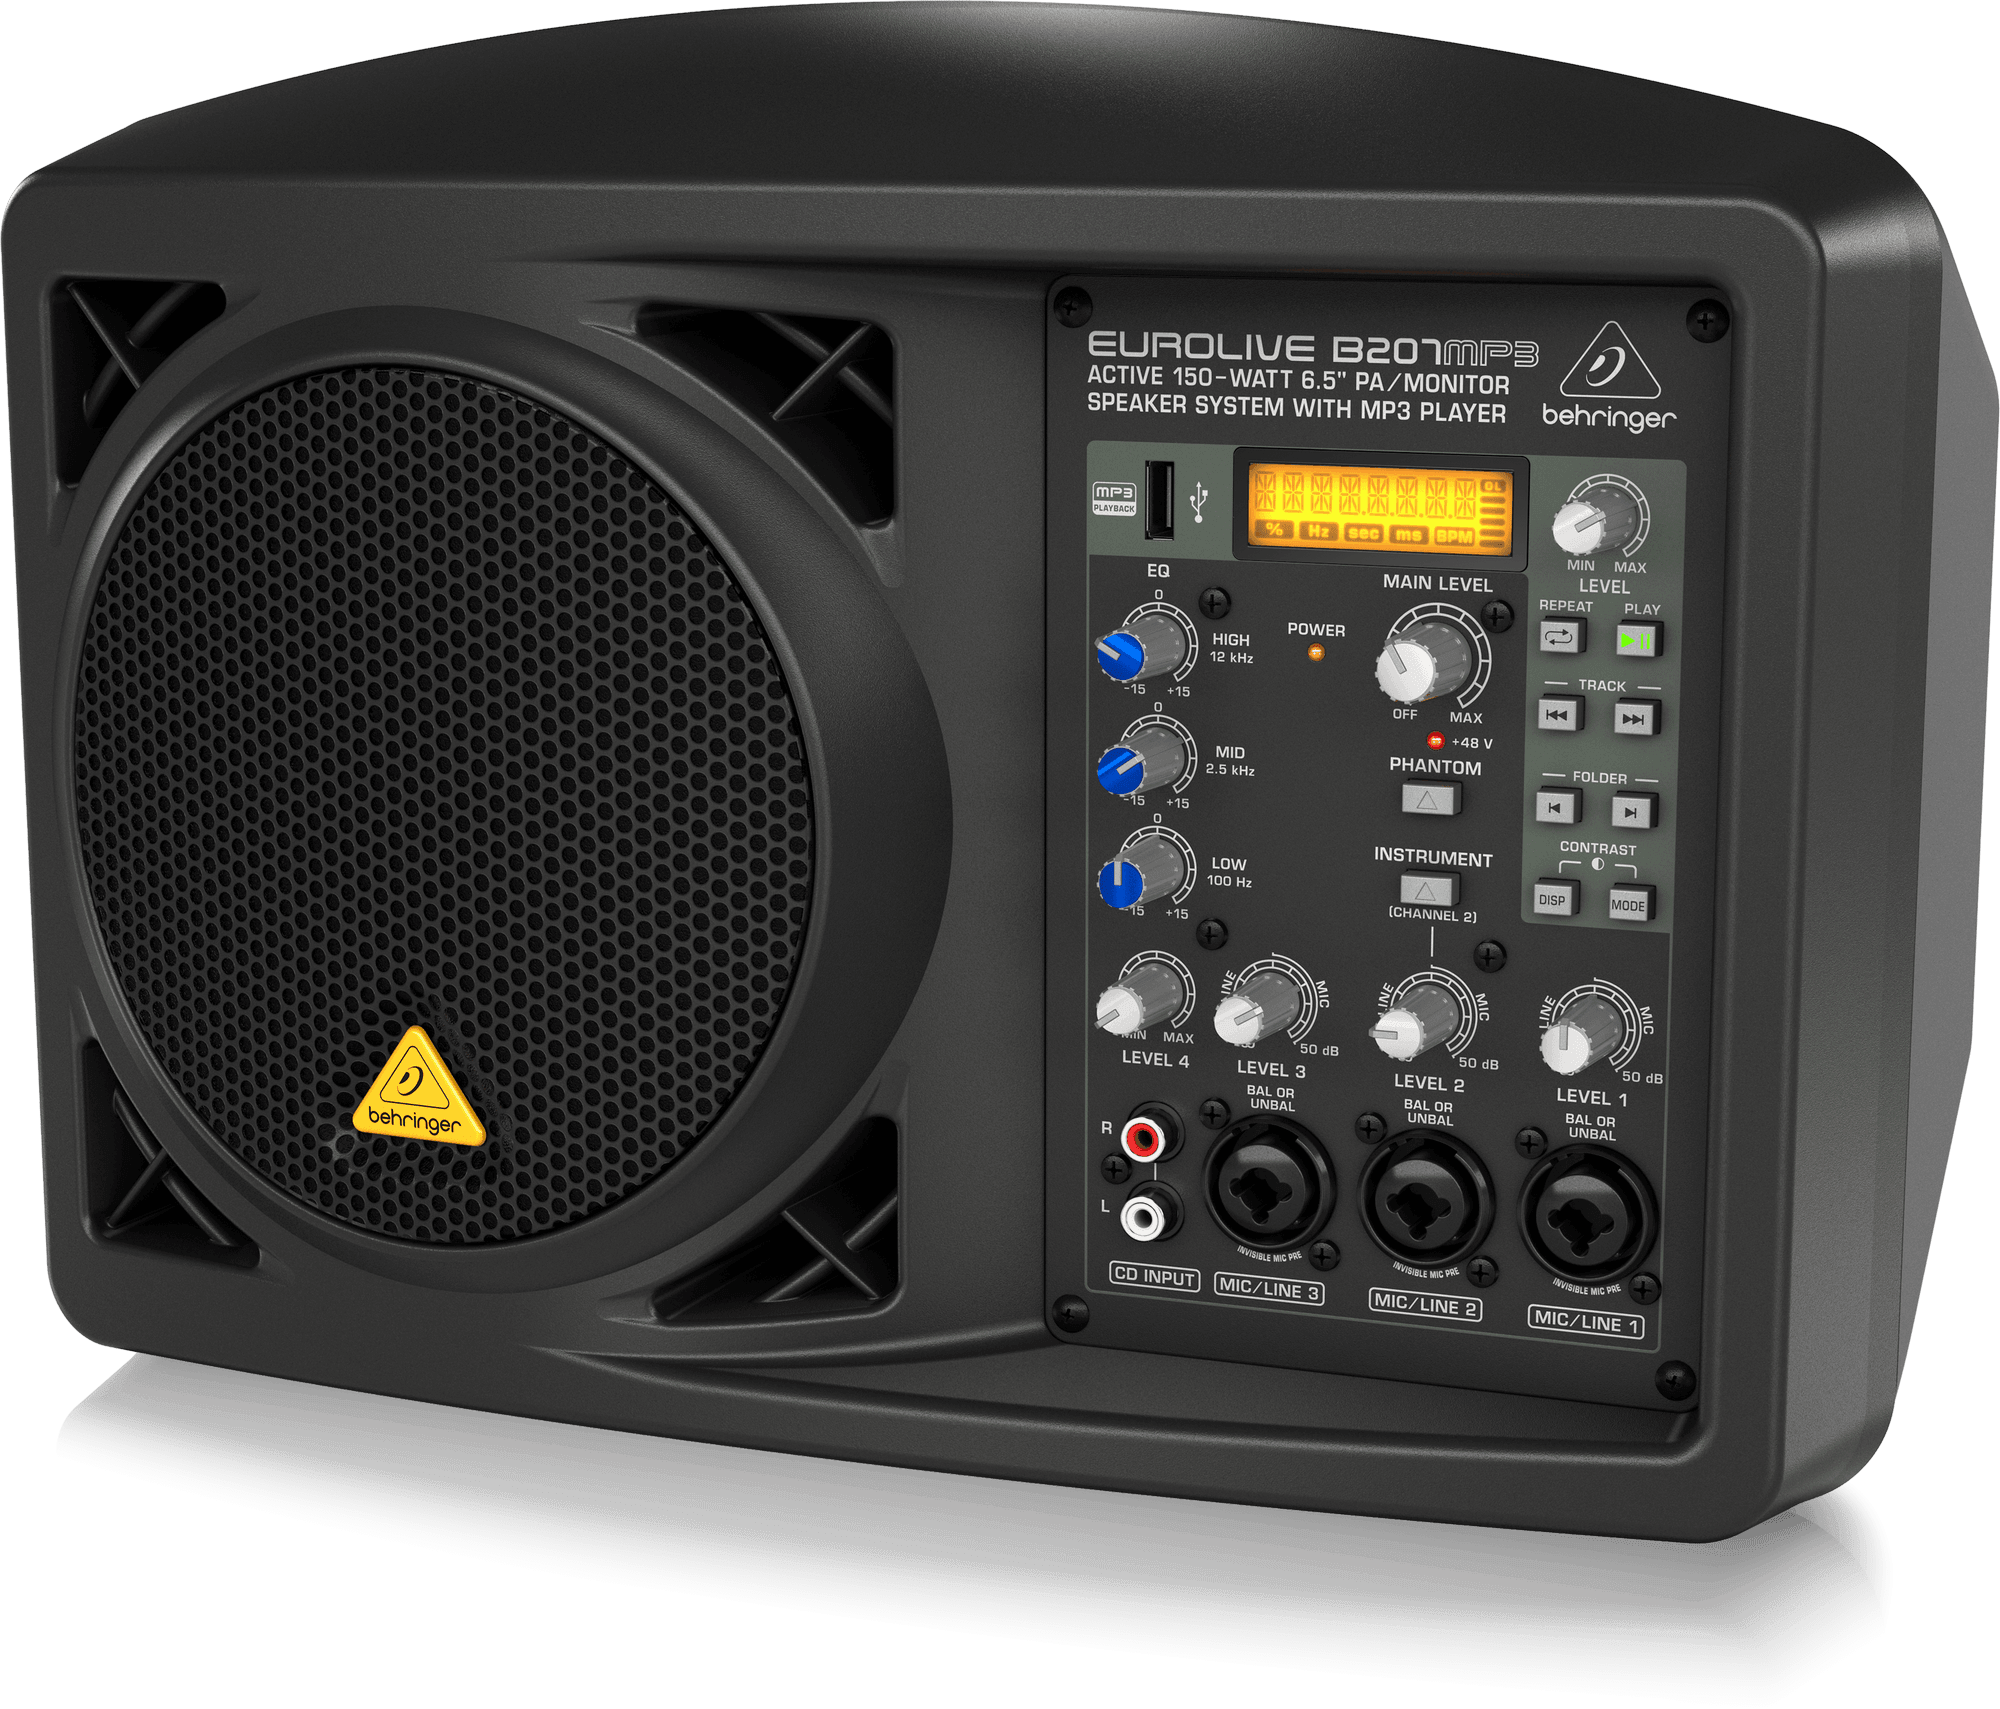 Behringer B207MP3 Active 150 Watt 6.5" PA/Monitor Speaker System with MP3 Player | BEHRINGER , Zoso Music